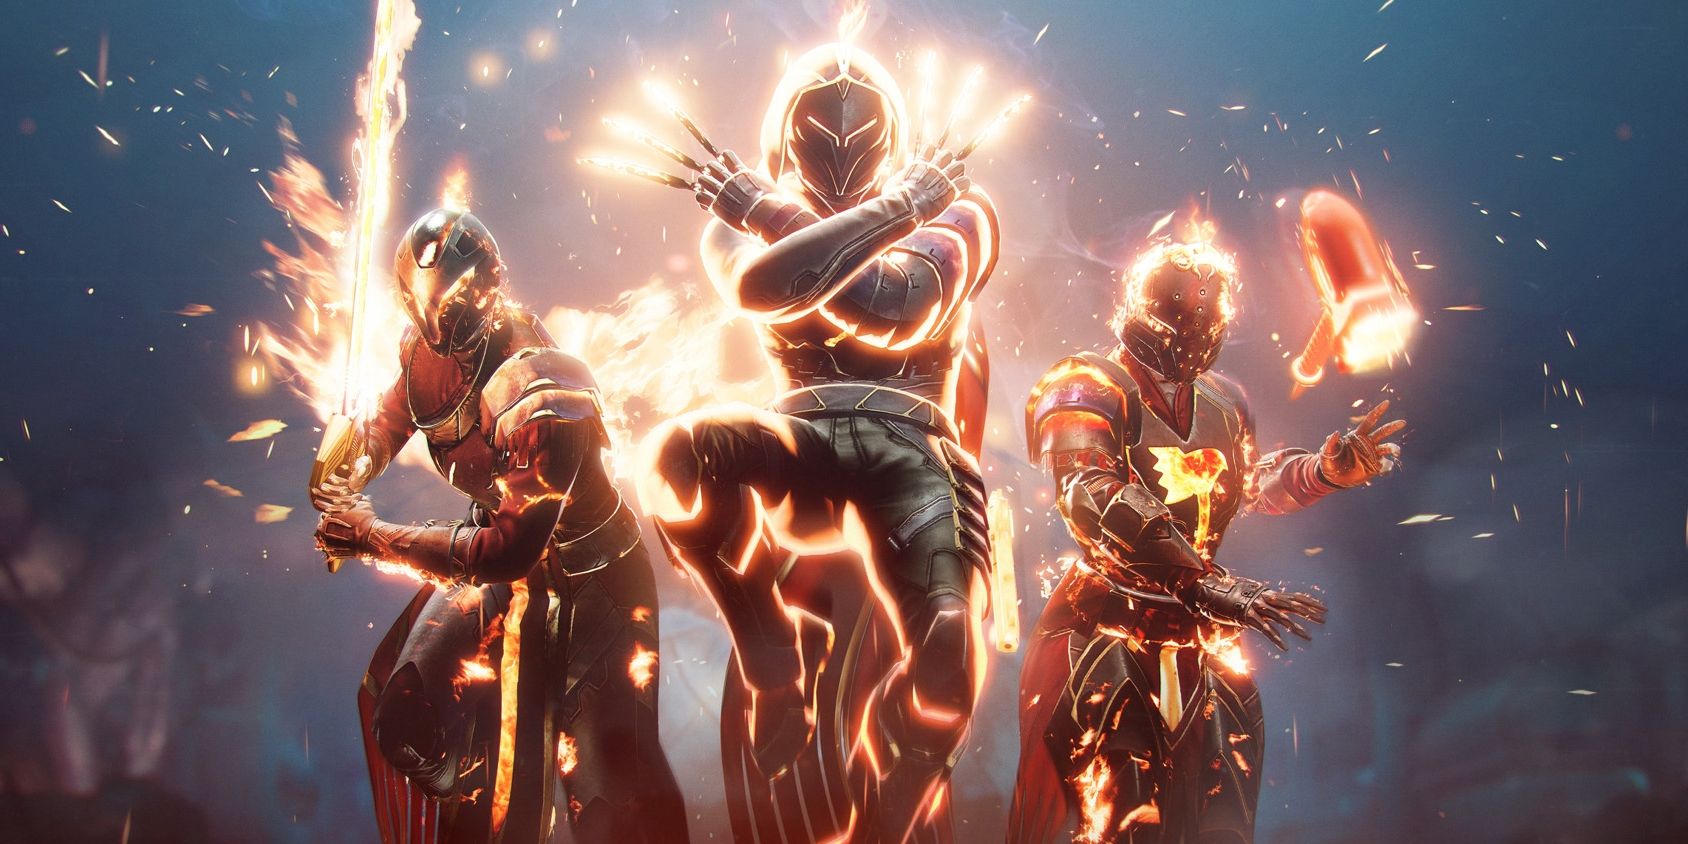 A Destiny 2 Fireteam composed of a Warlock using Daybreak on the left, a Hunter using Blade Barrage in the middle, and a Titan using Hammer of Sol on the right. All of them use the Solar subclass armor ornaments.